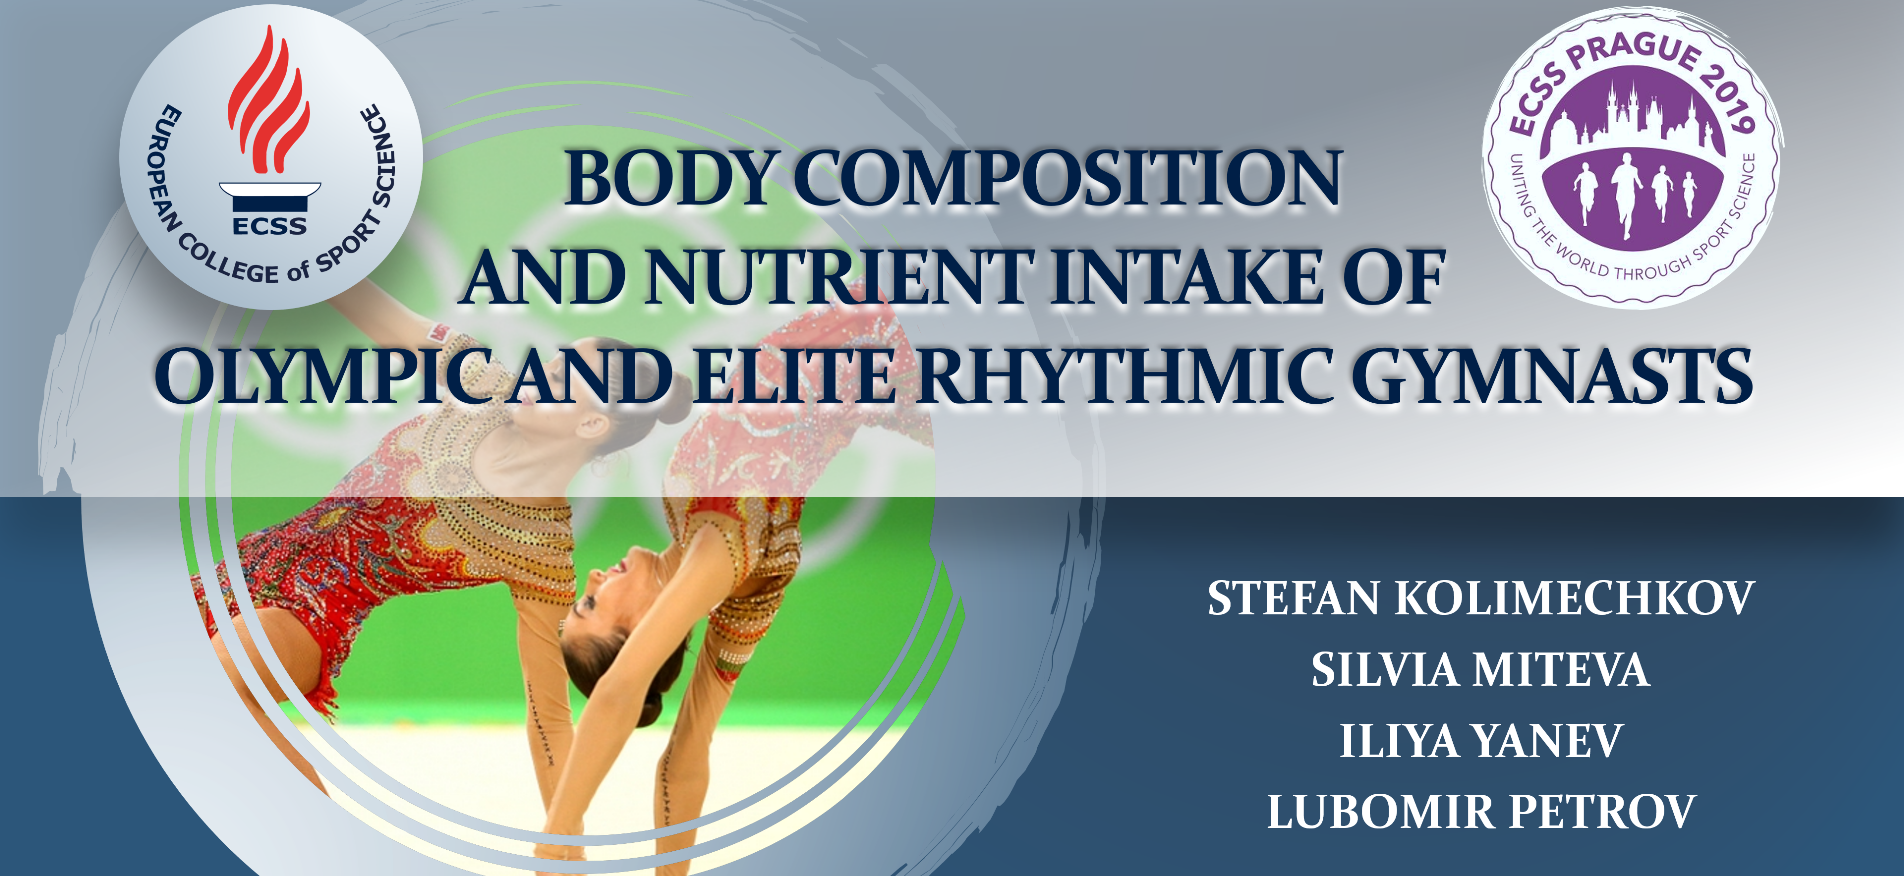 Body composition and nutrient intake of Olympic and elite rhythmic gymnasts at the ECSS Congress in Prague 2019